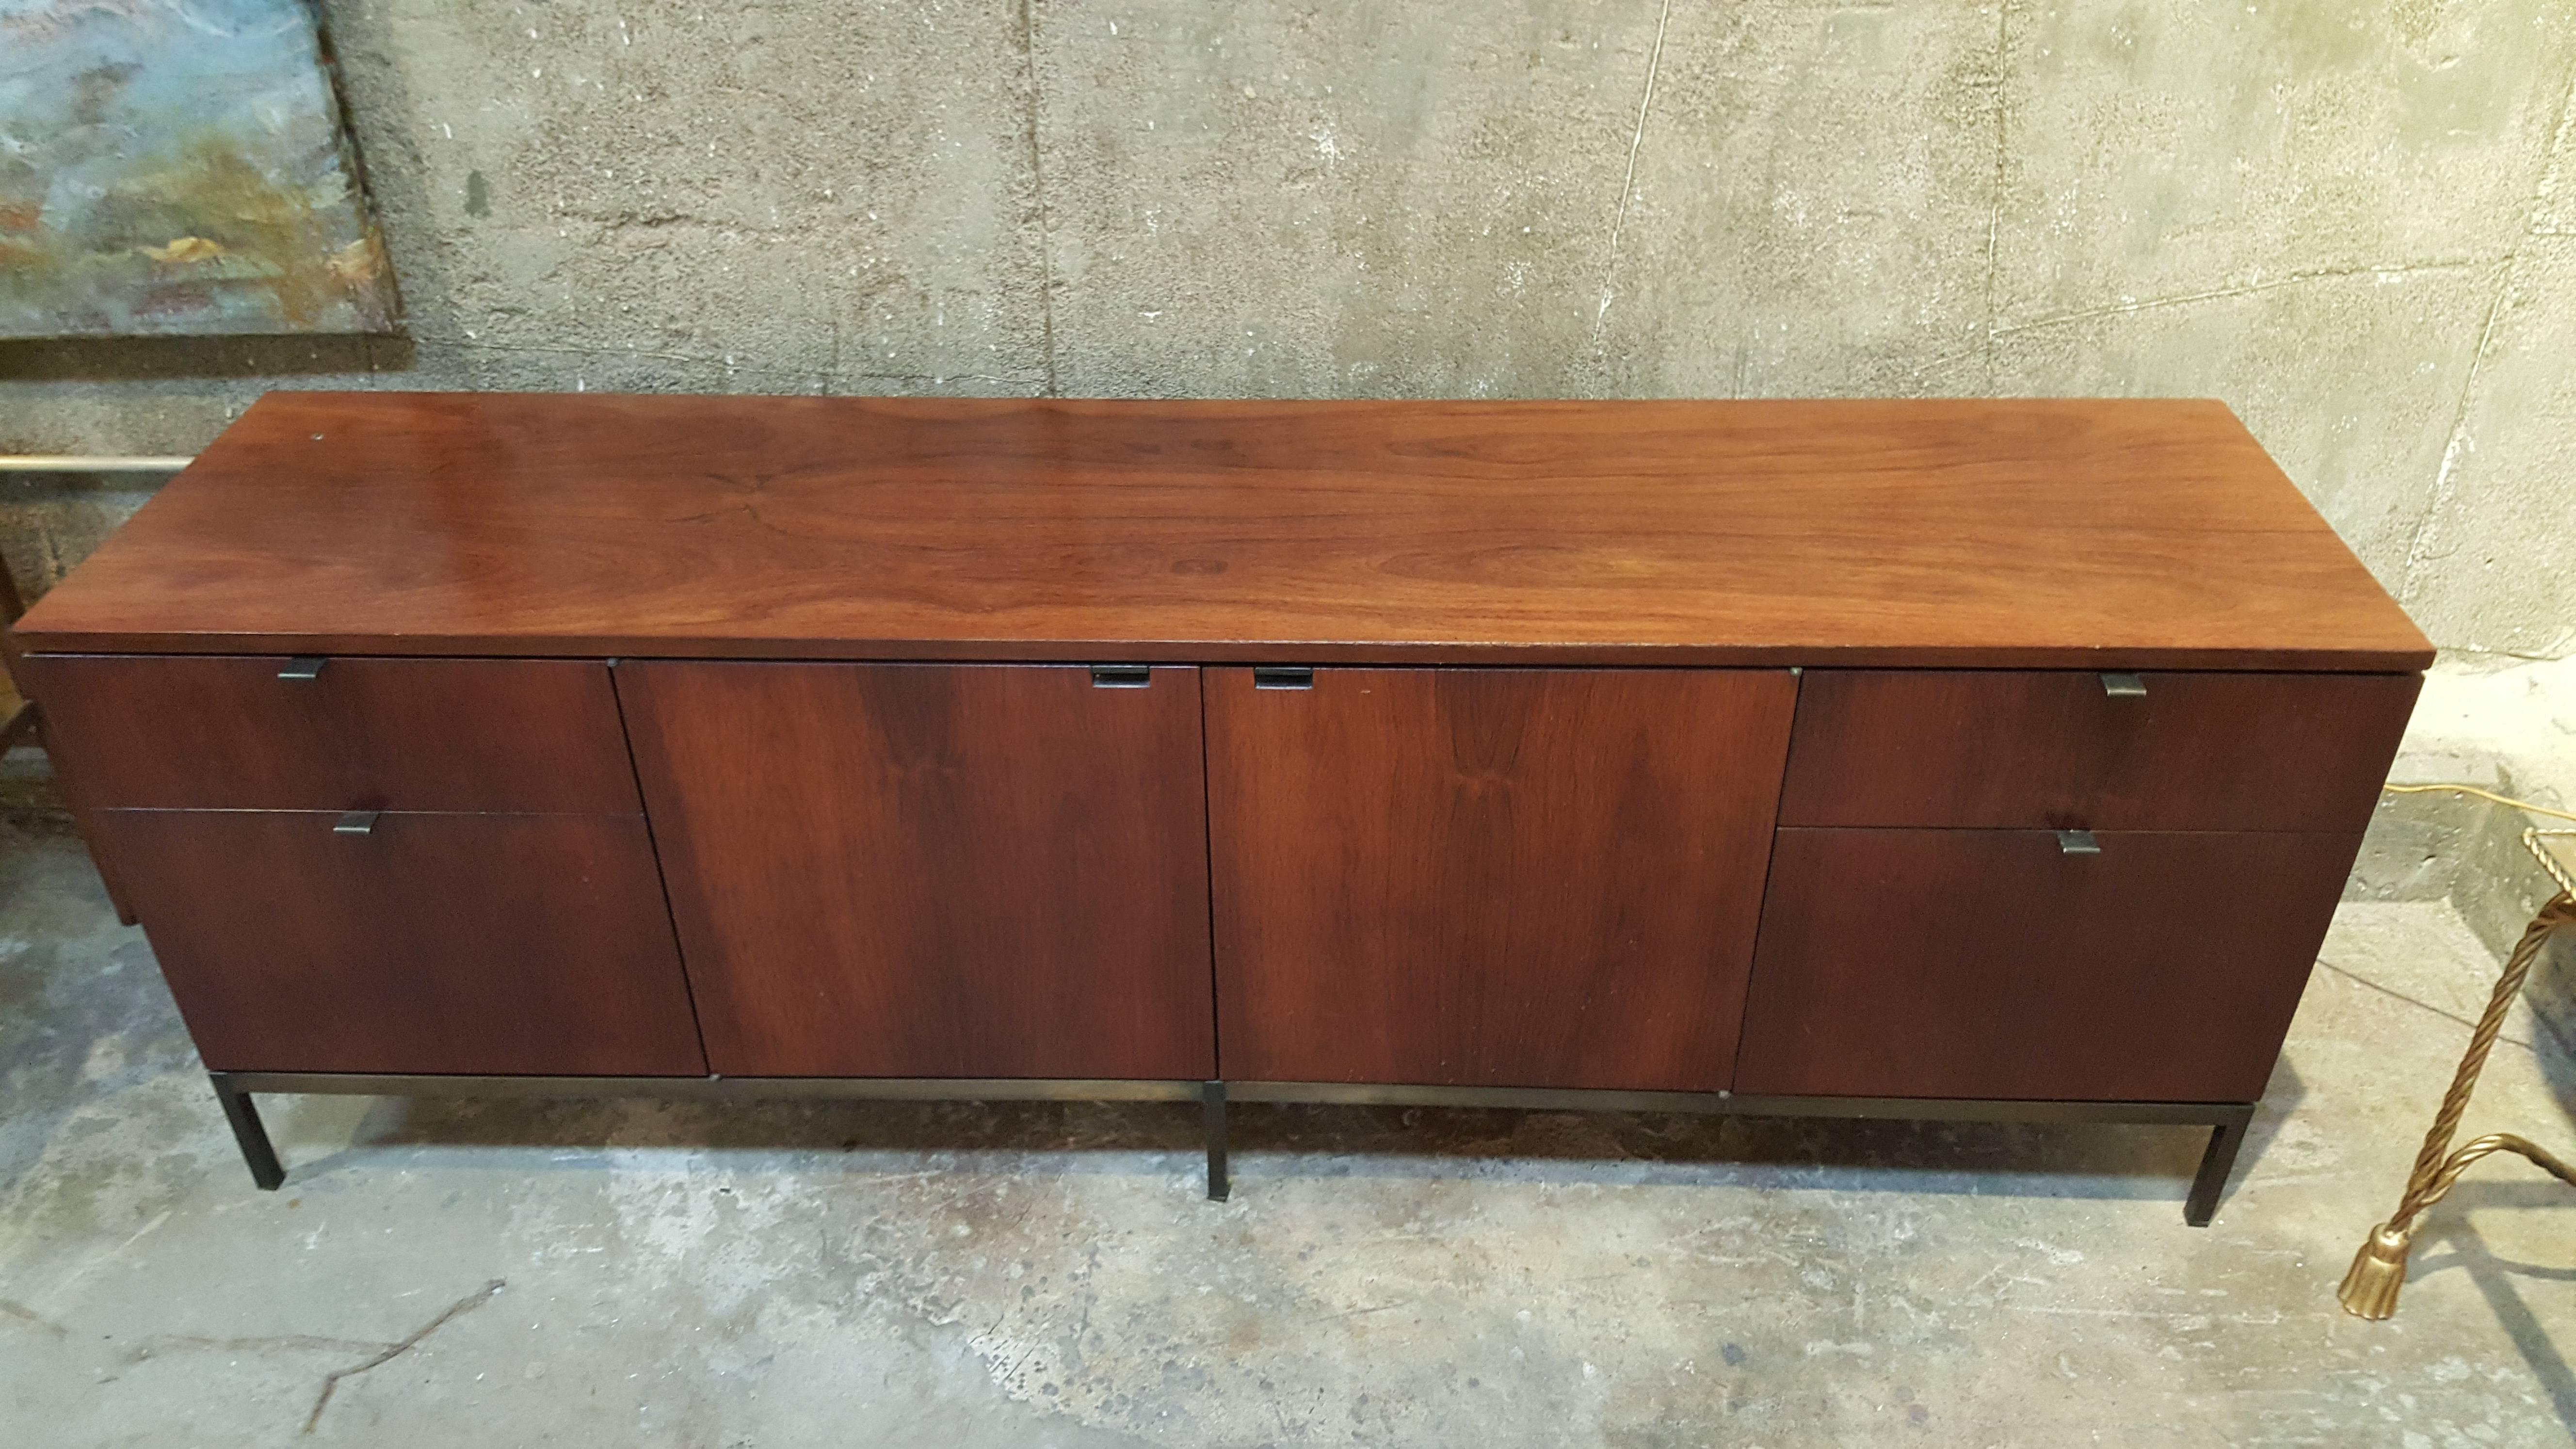 Rosewood credenza on bronzed metal base by Knoll International. Tab on upper left surface locks entire cabinet. Retains original Knoll label, original finish.